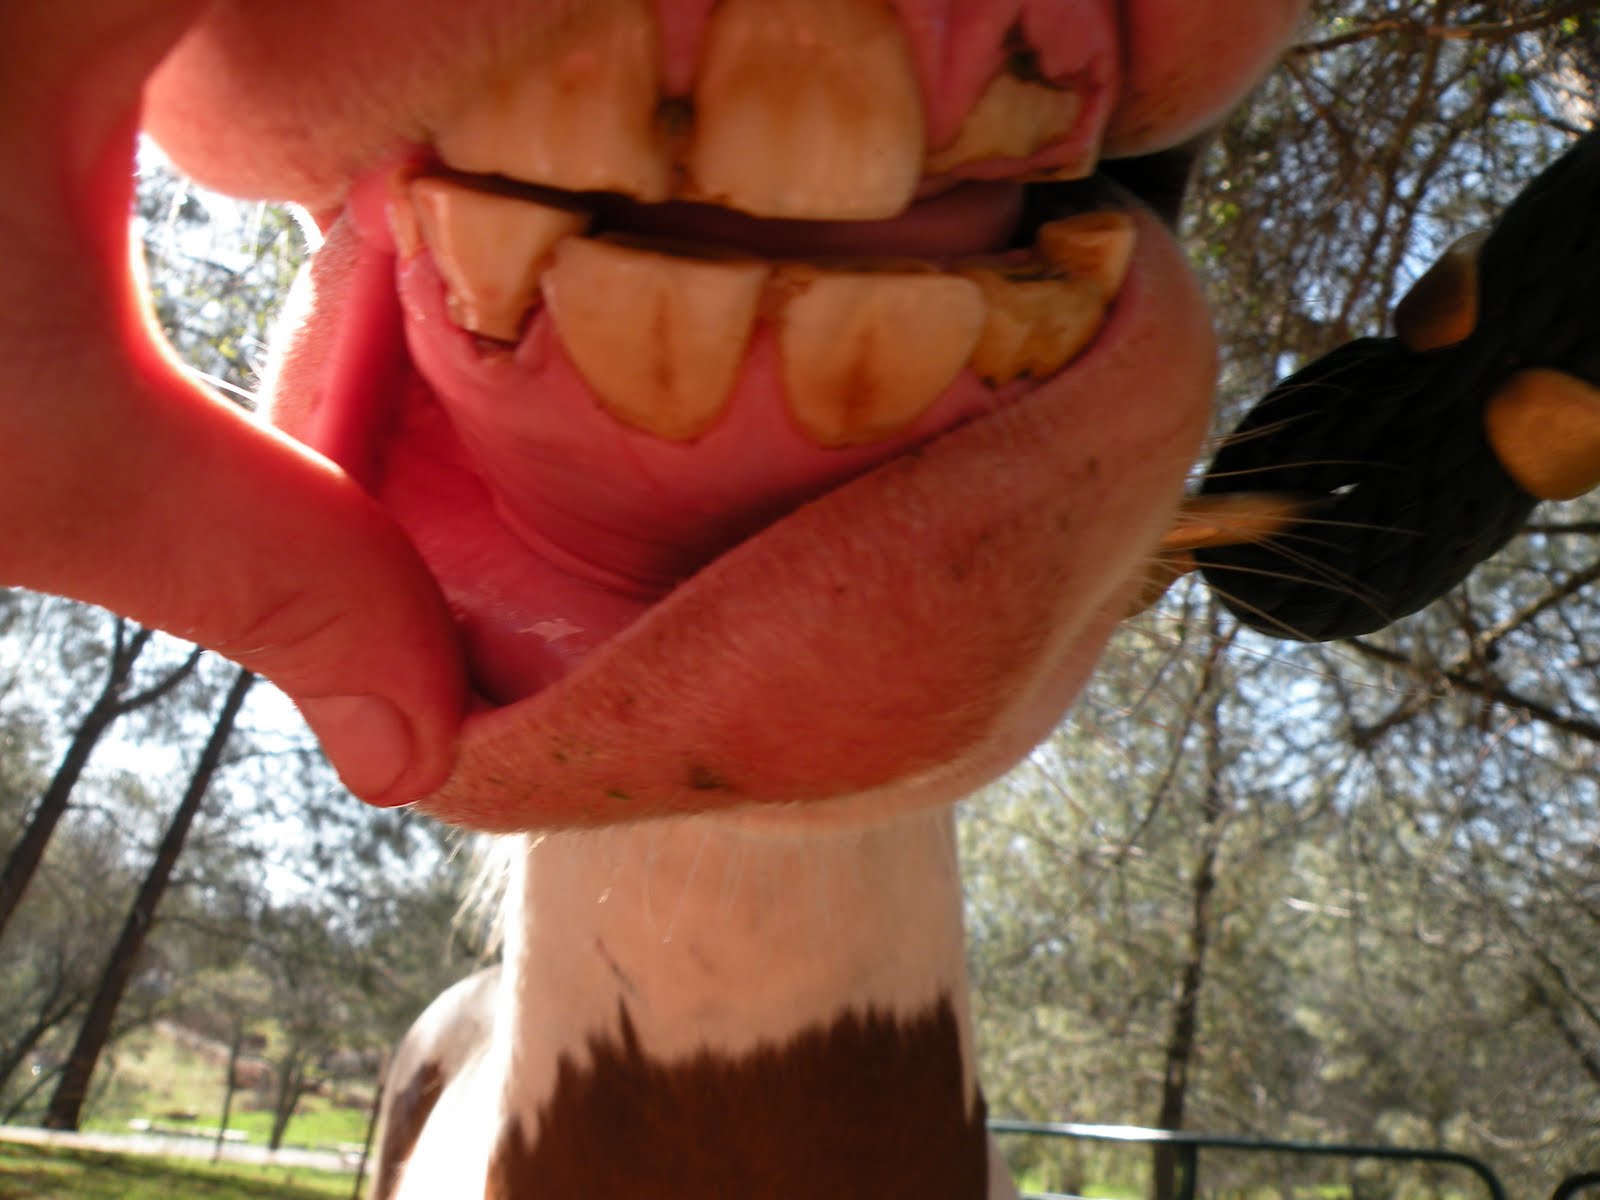 Equine Teeth Aging http://kathysequinedentistry.blogspot.com/2010/04 ...